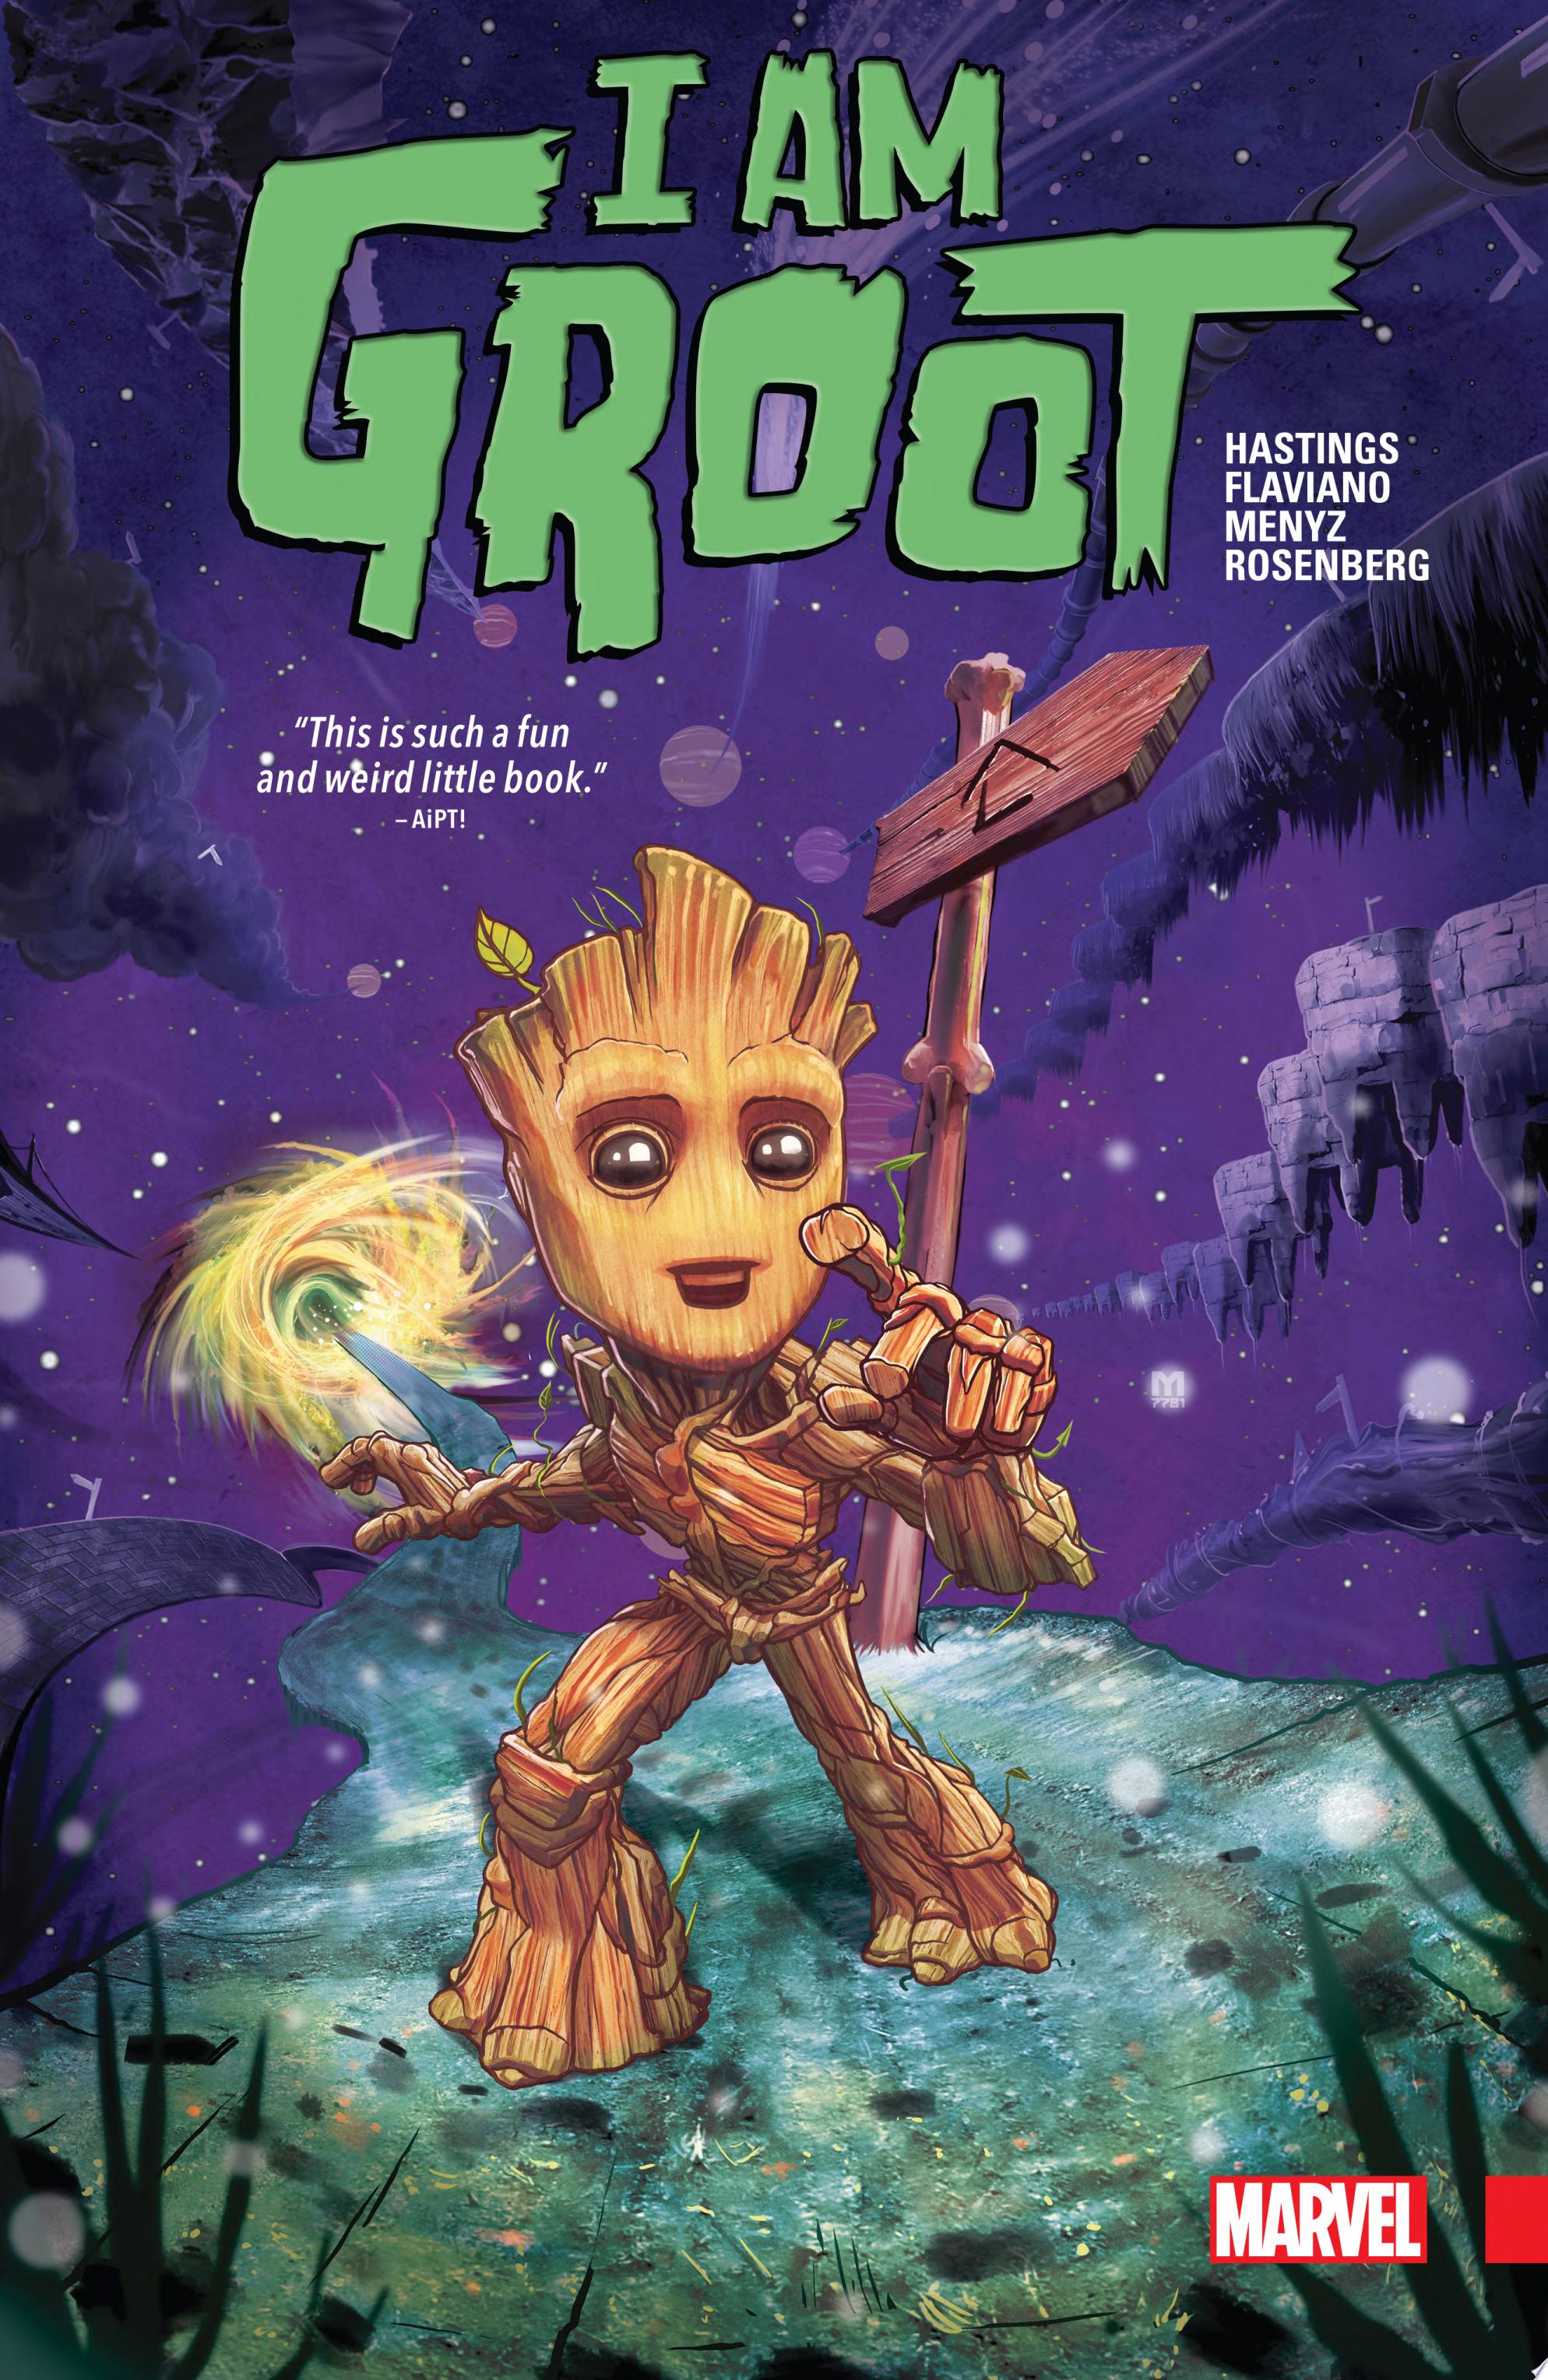 Image for "I Am Groot"